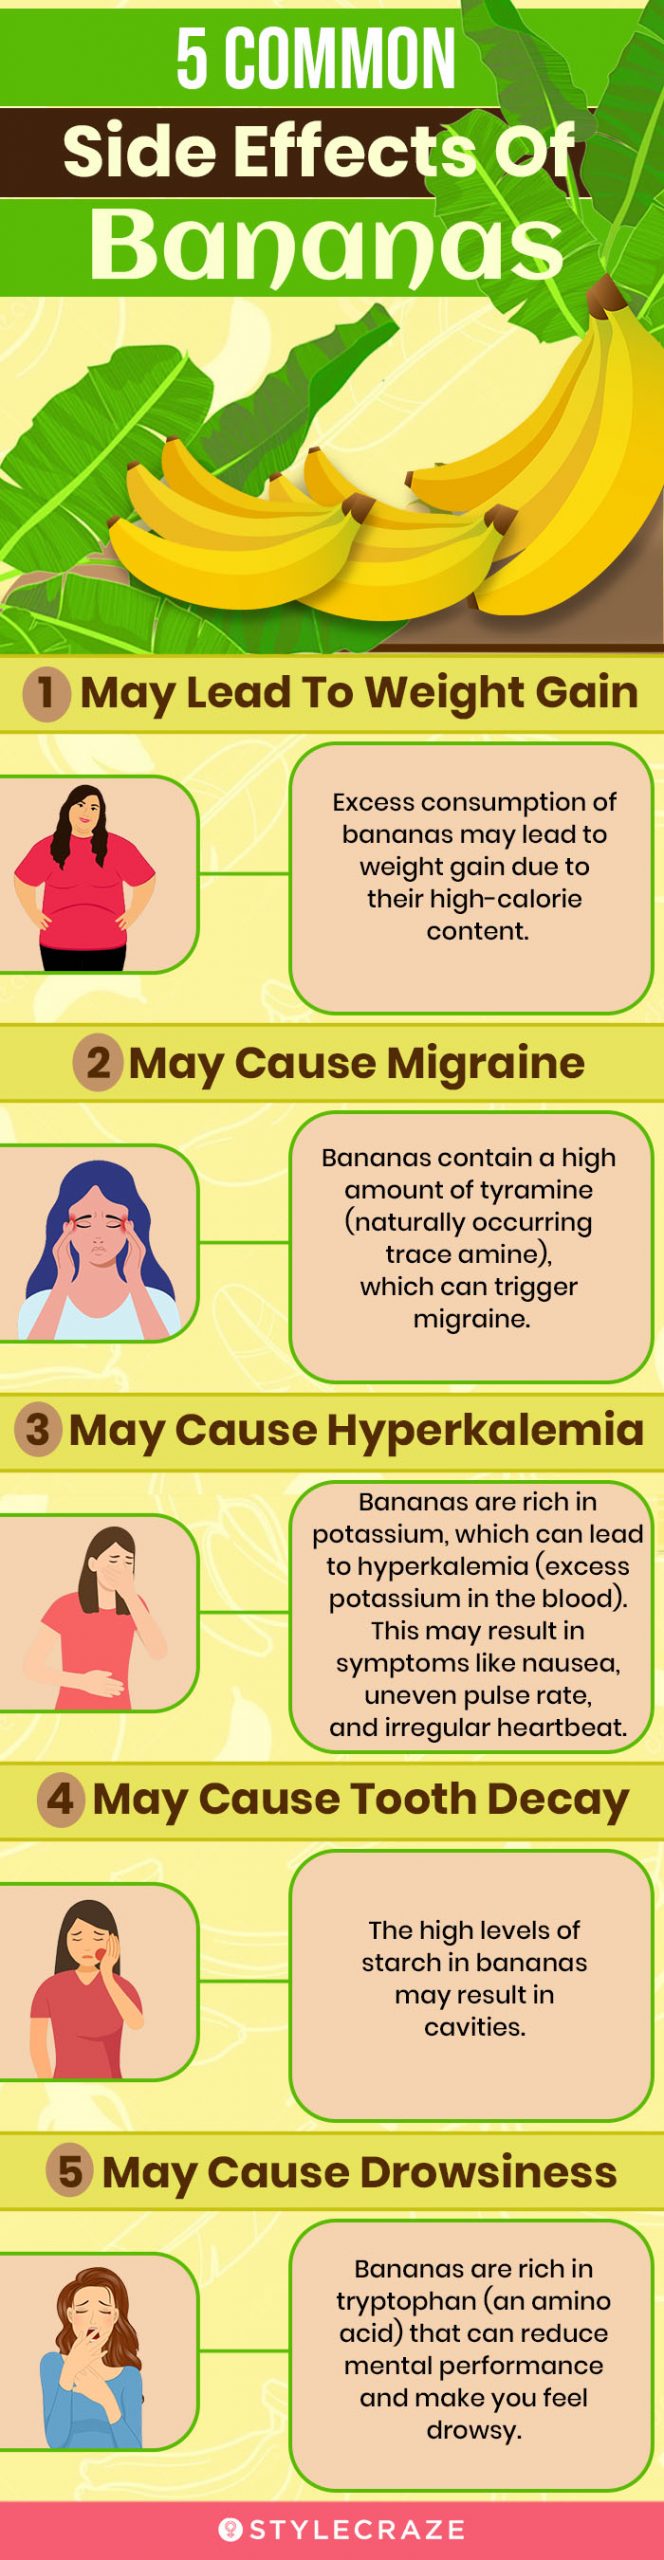 5 common side effects of bananas (infographic)